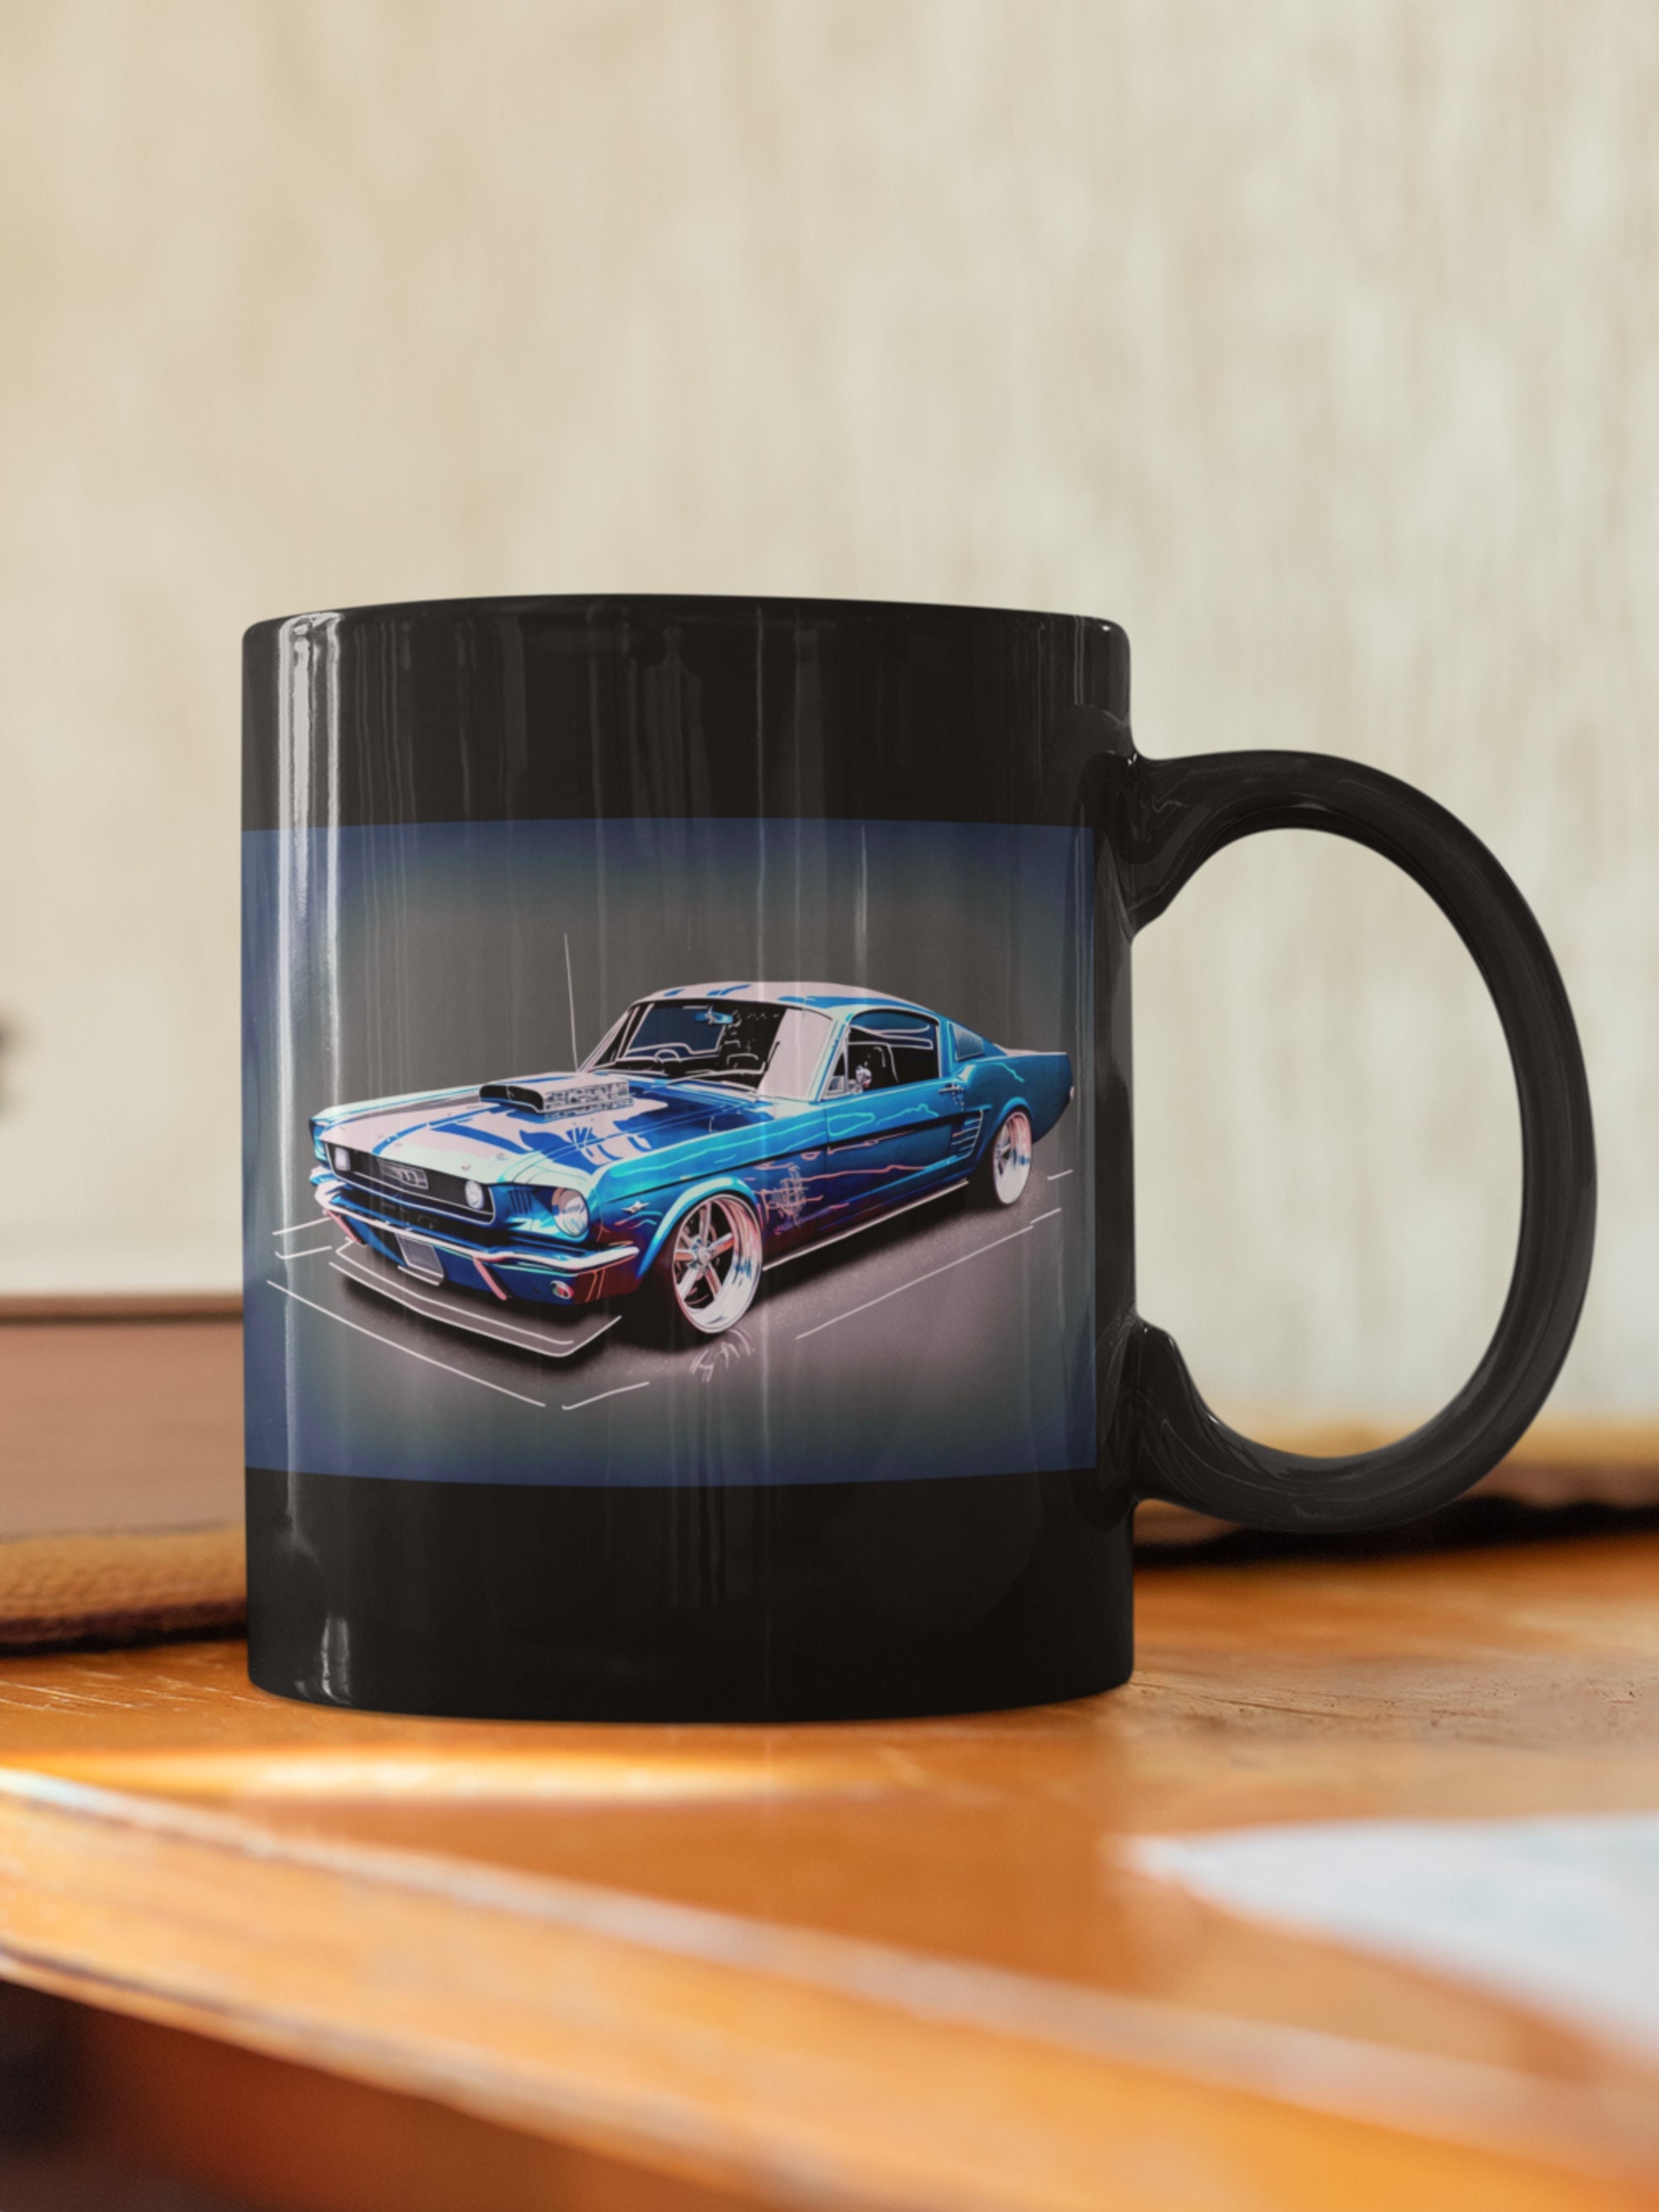 Muscle Car 20oz Mug - The Henry Ford